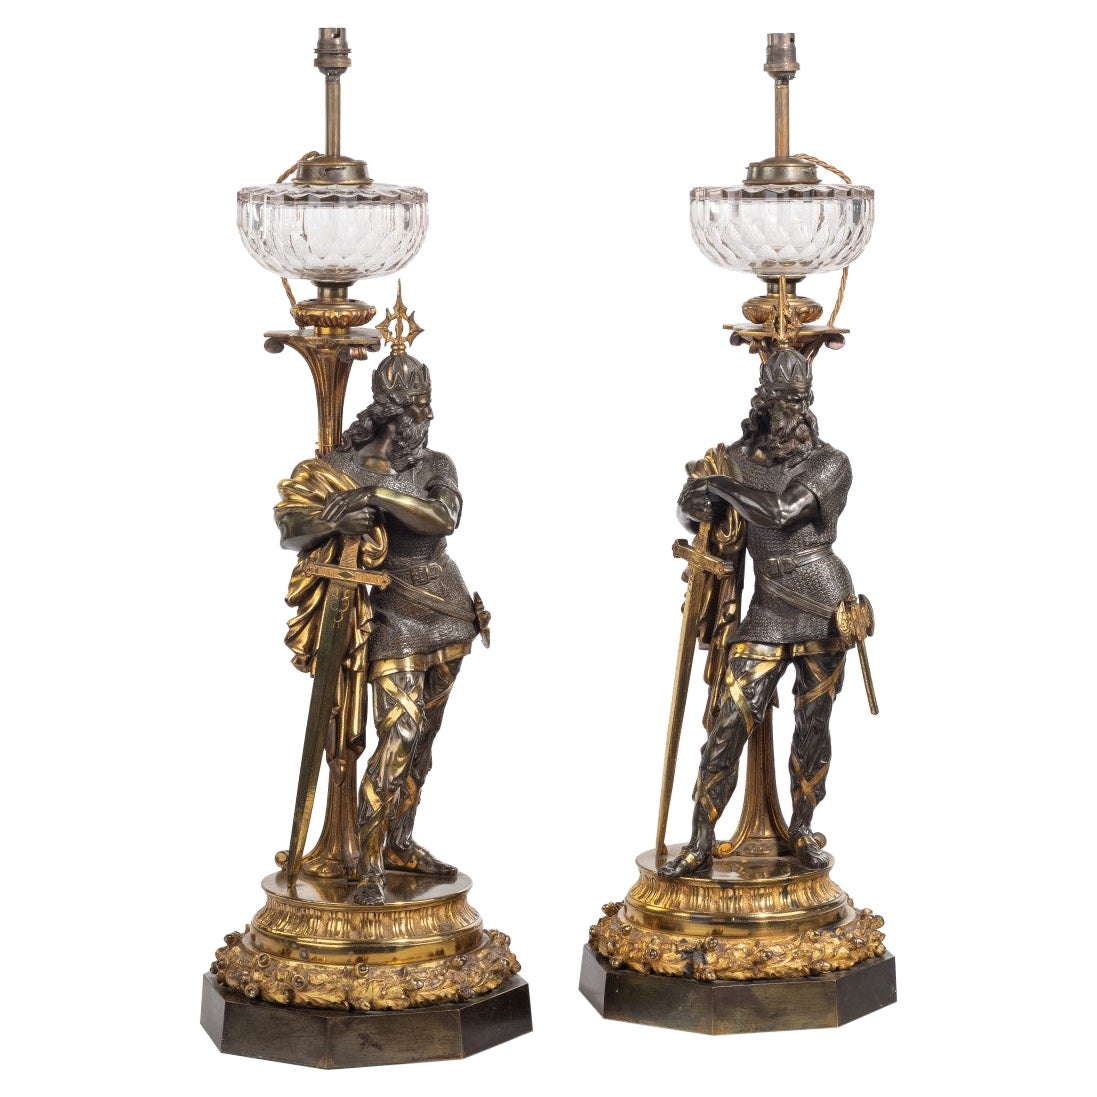 Very Fine Pair of Mid-Victorian Parcel Gilt Bronze Oil Lamps, by Hinks